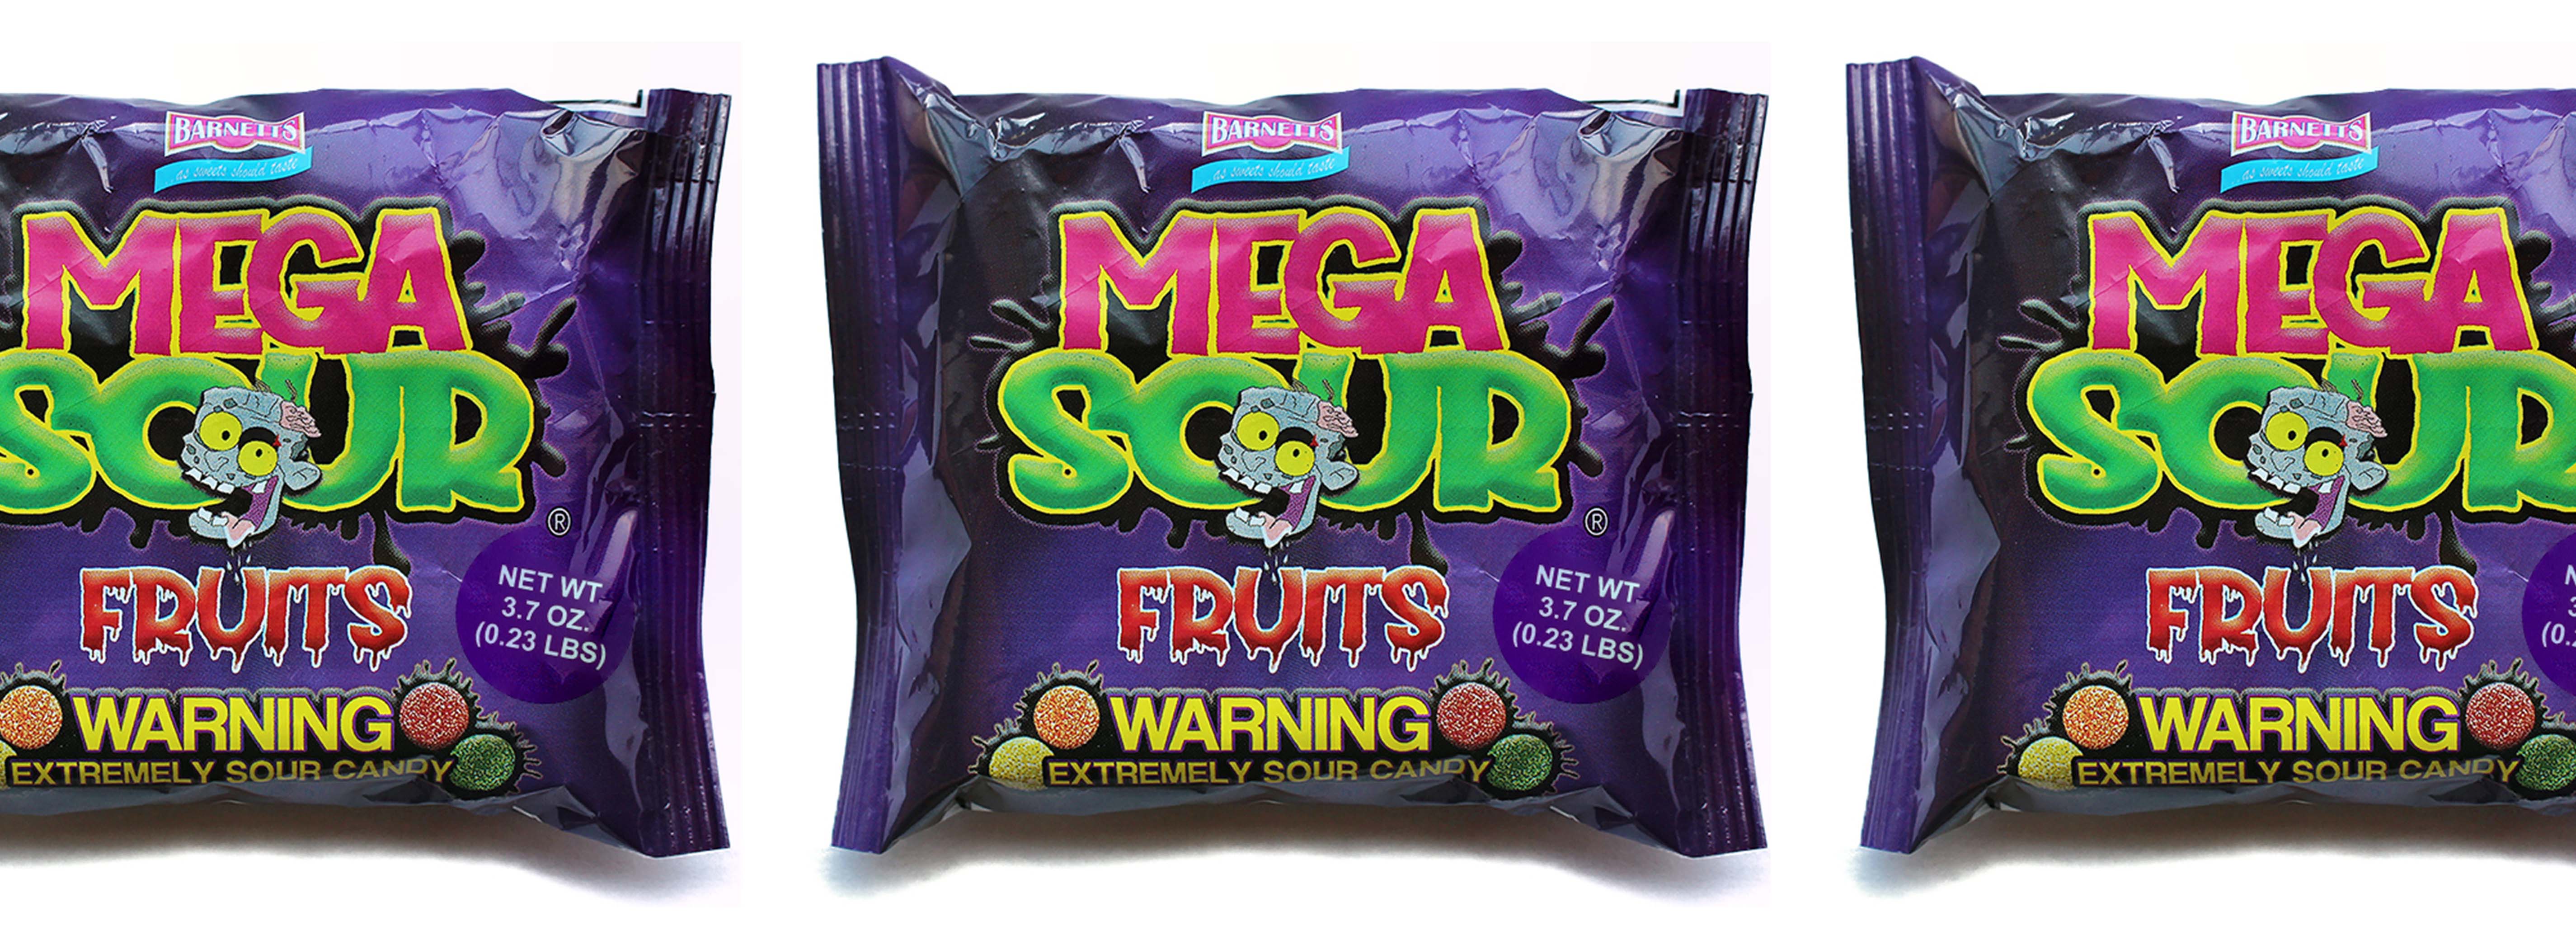 Barnetts-Mega-Sour-Candy-USA-Distributor-Redstone-Foods-Worlds-Most-Sour-Candy 2023